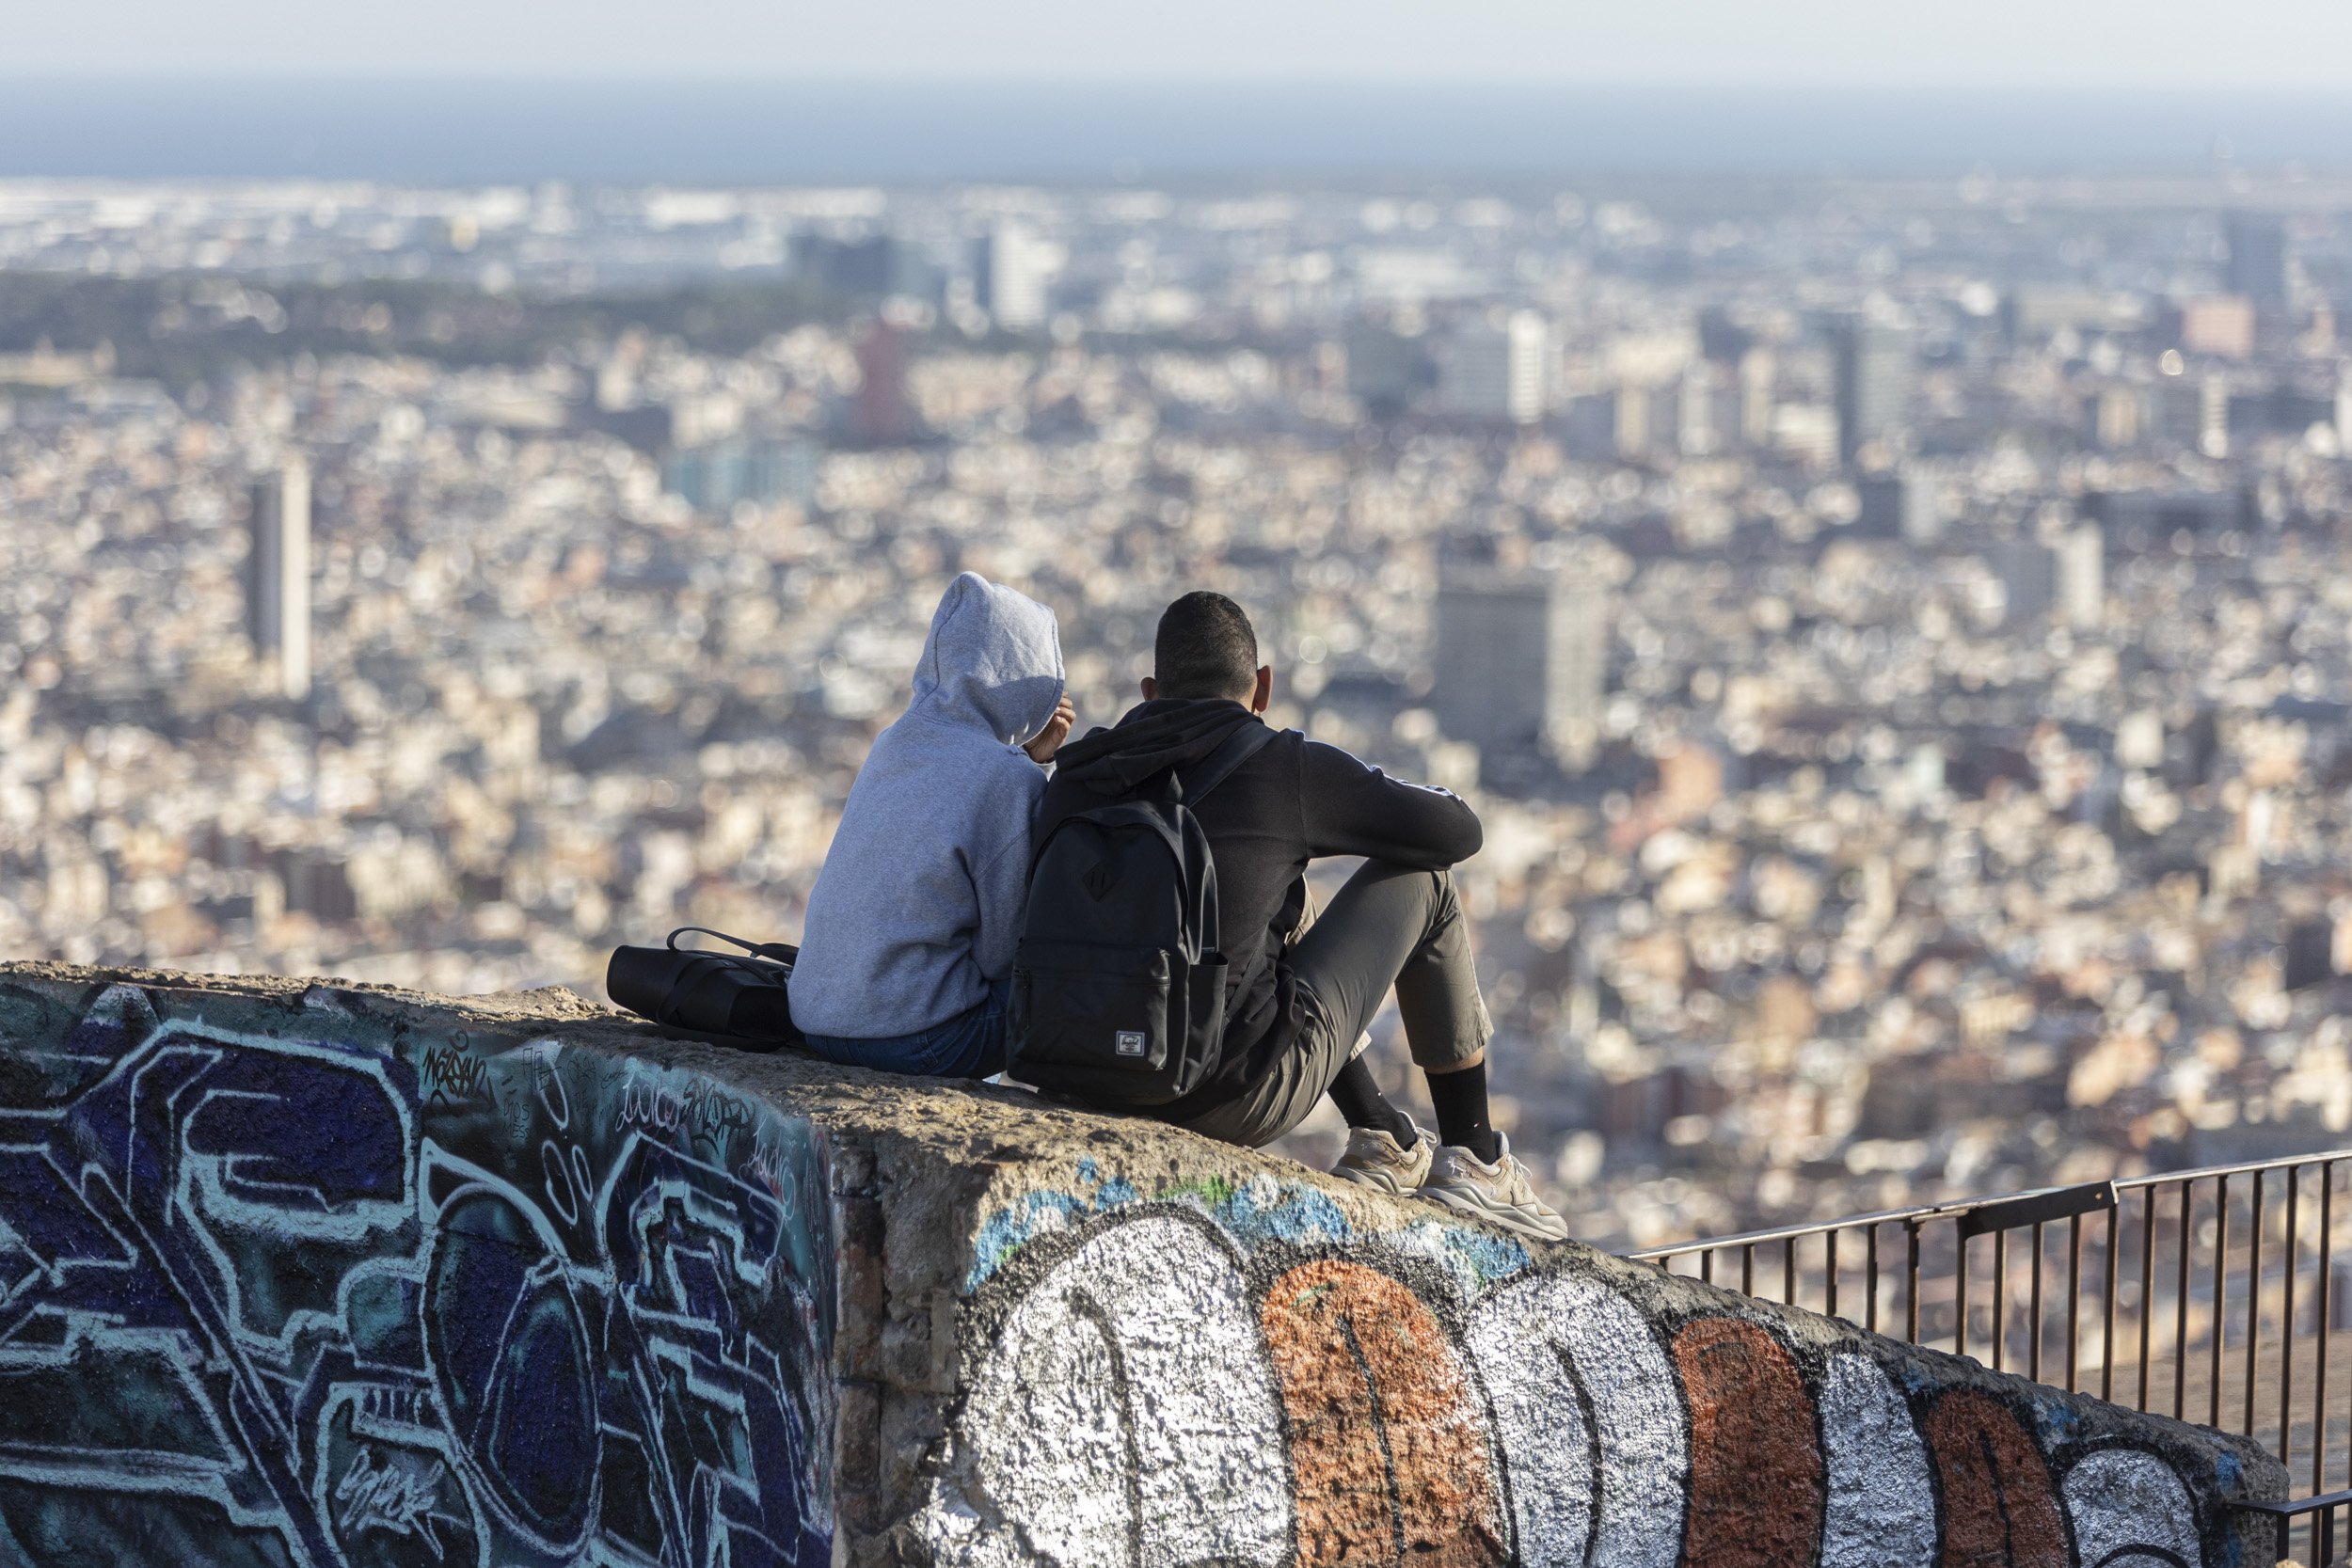 Jumping the fence to the 'Bunkers' is "occasional and sporadic", says Barcelona council